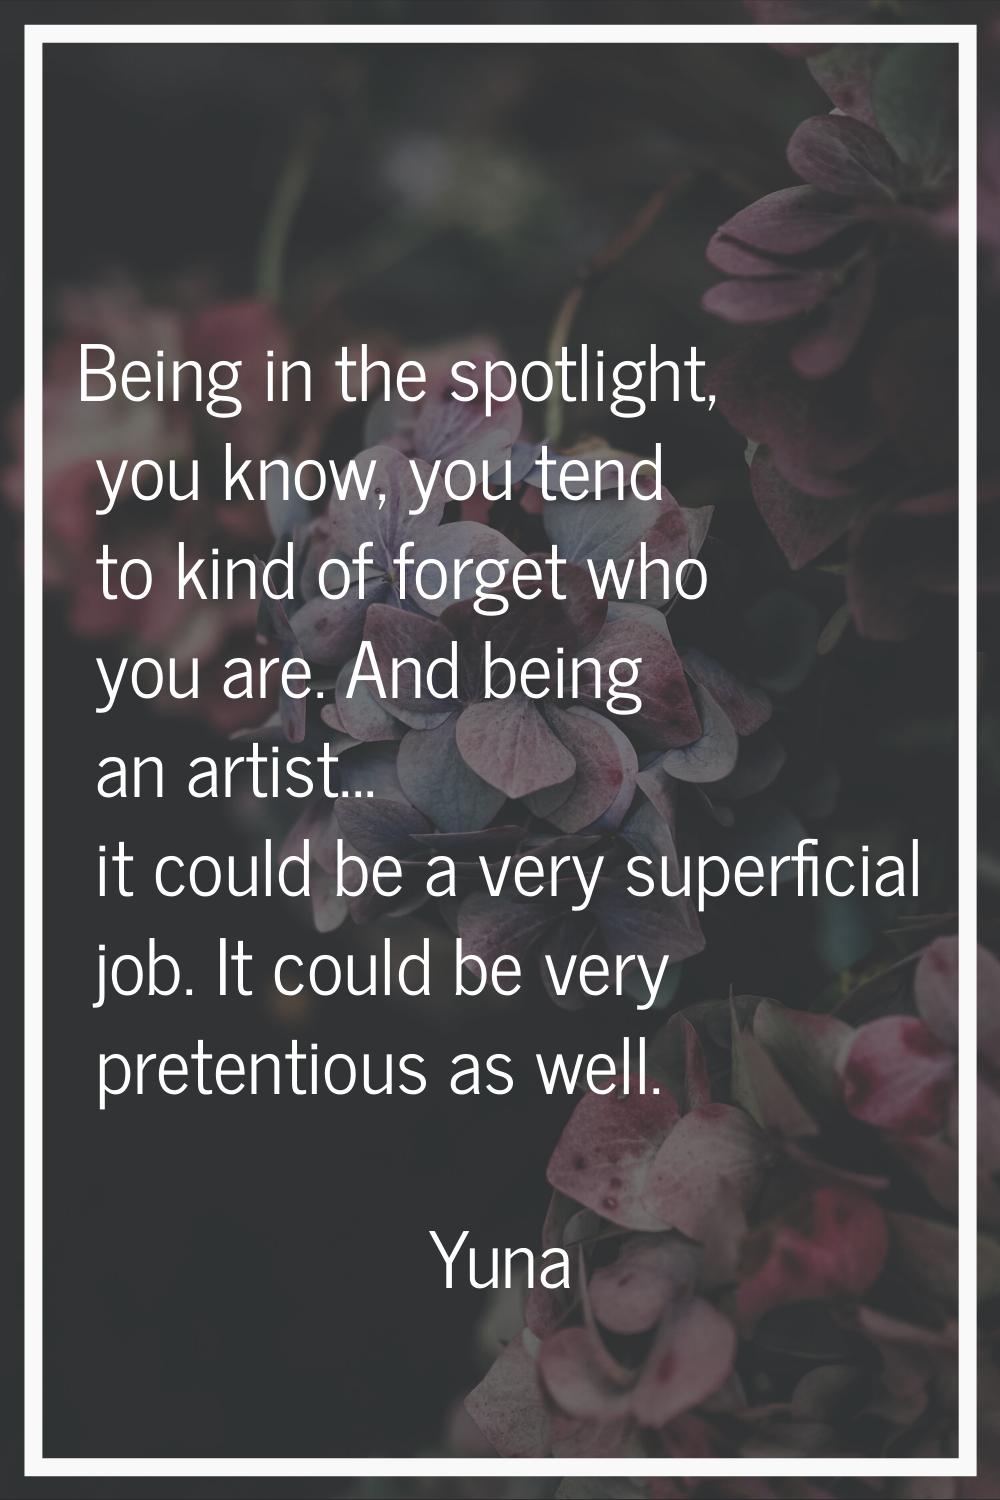 Being in the spotlight, you know, you tend to kind of forget who you are. And being an artist... it